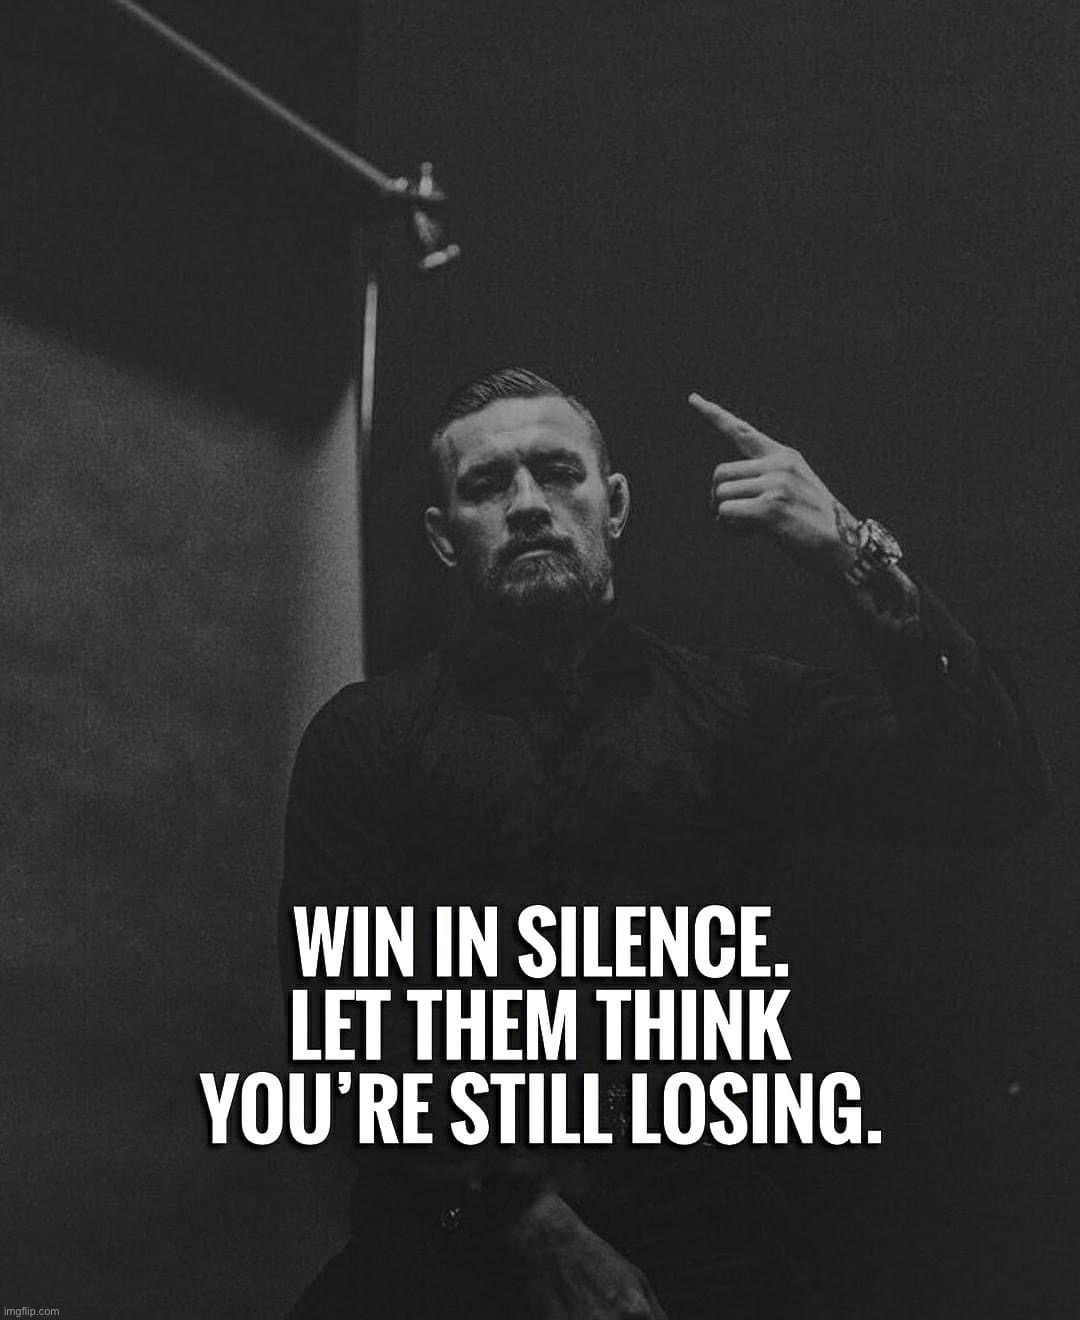 Win in silence let them think you’re still losing | image tagged in win in silence let them think you re still losing | made w/ Imgflip meme maker